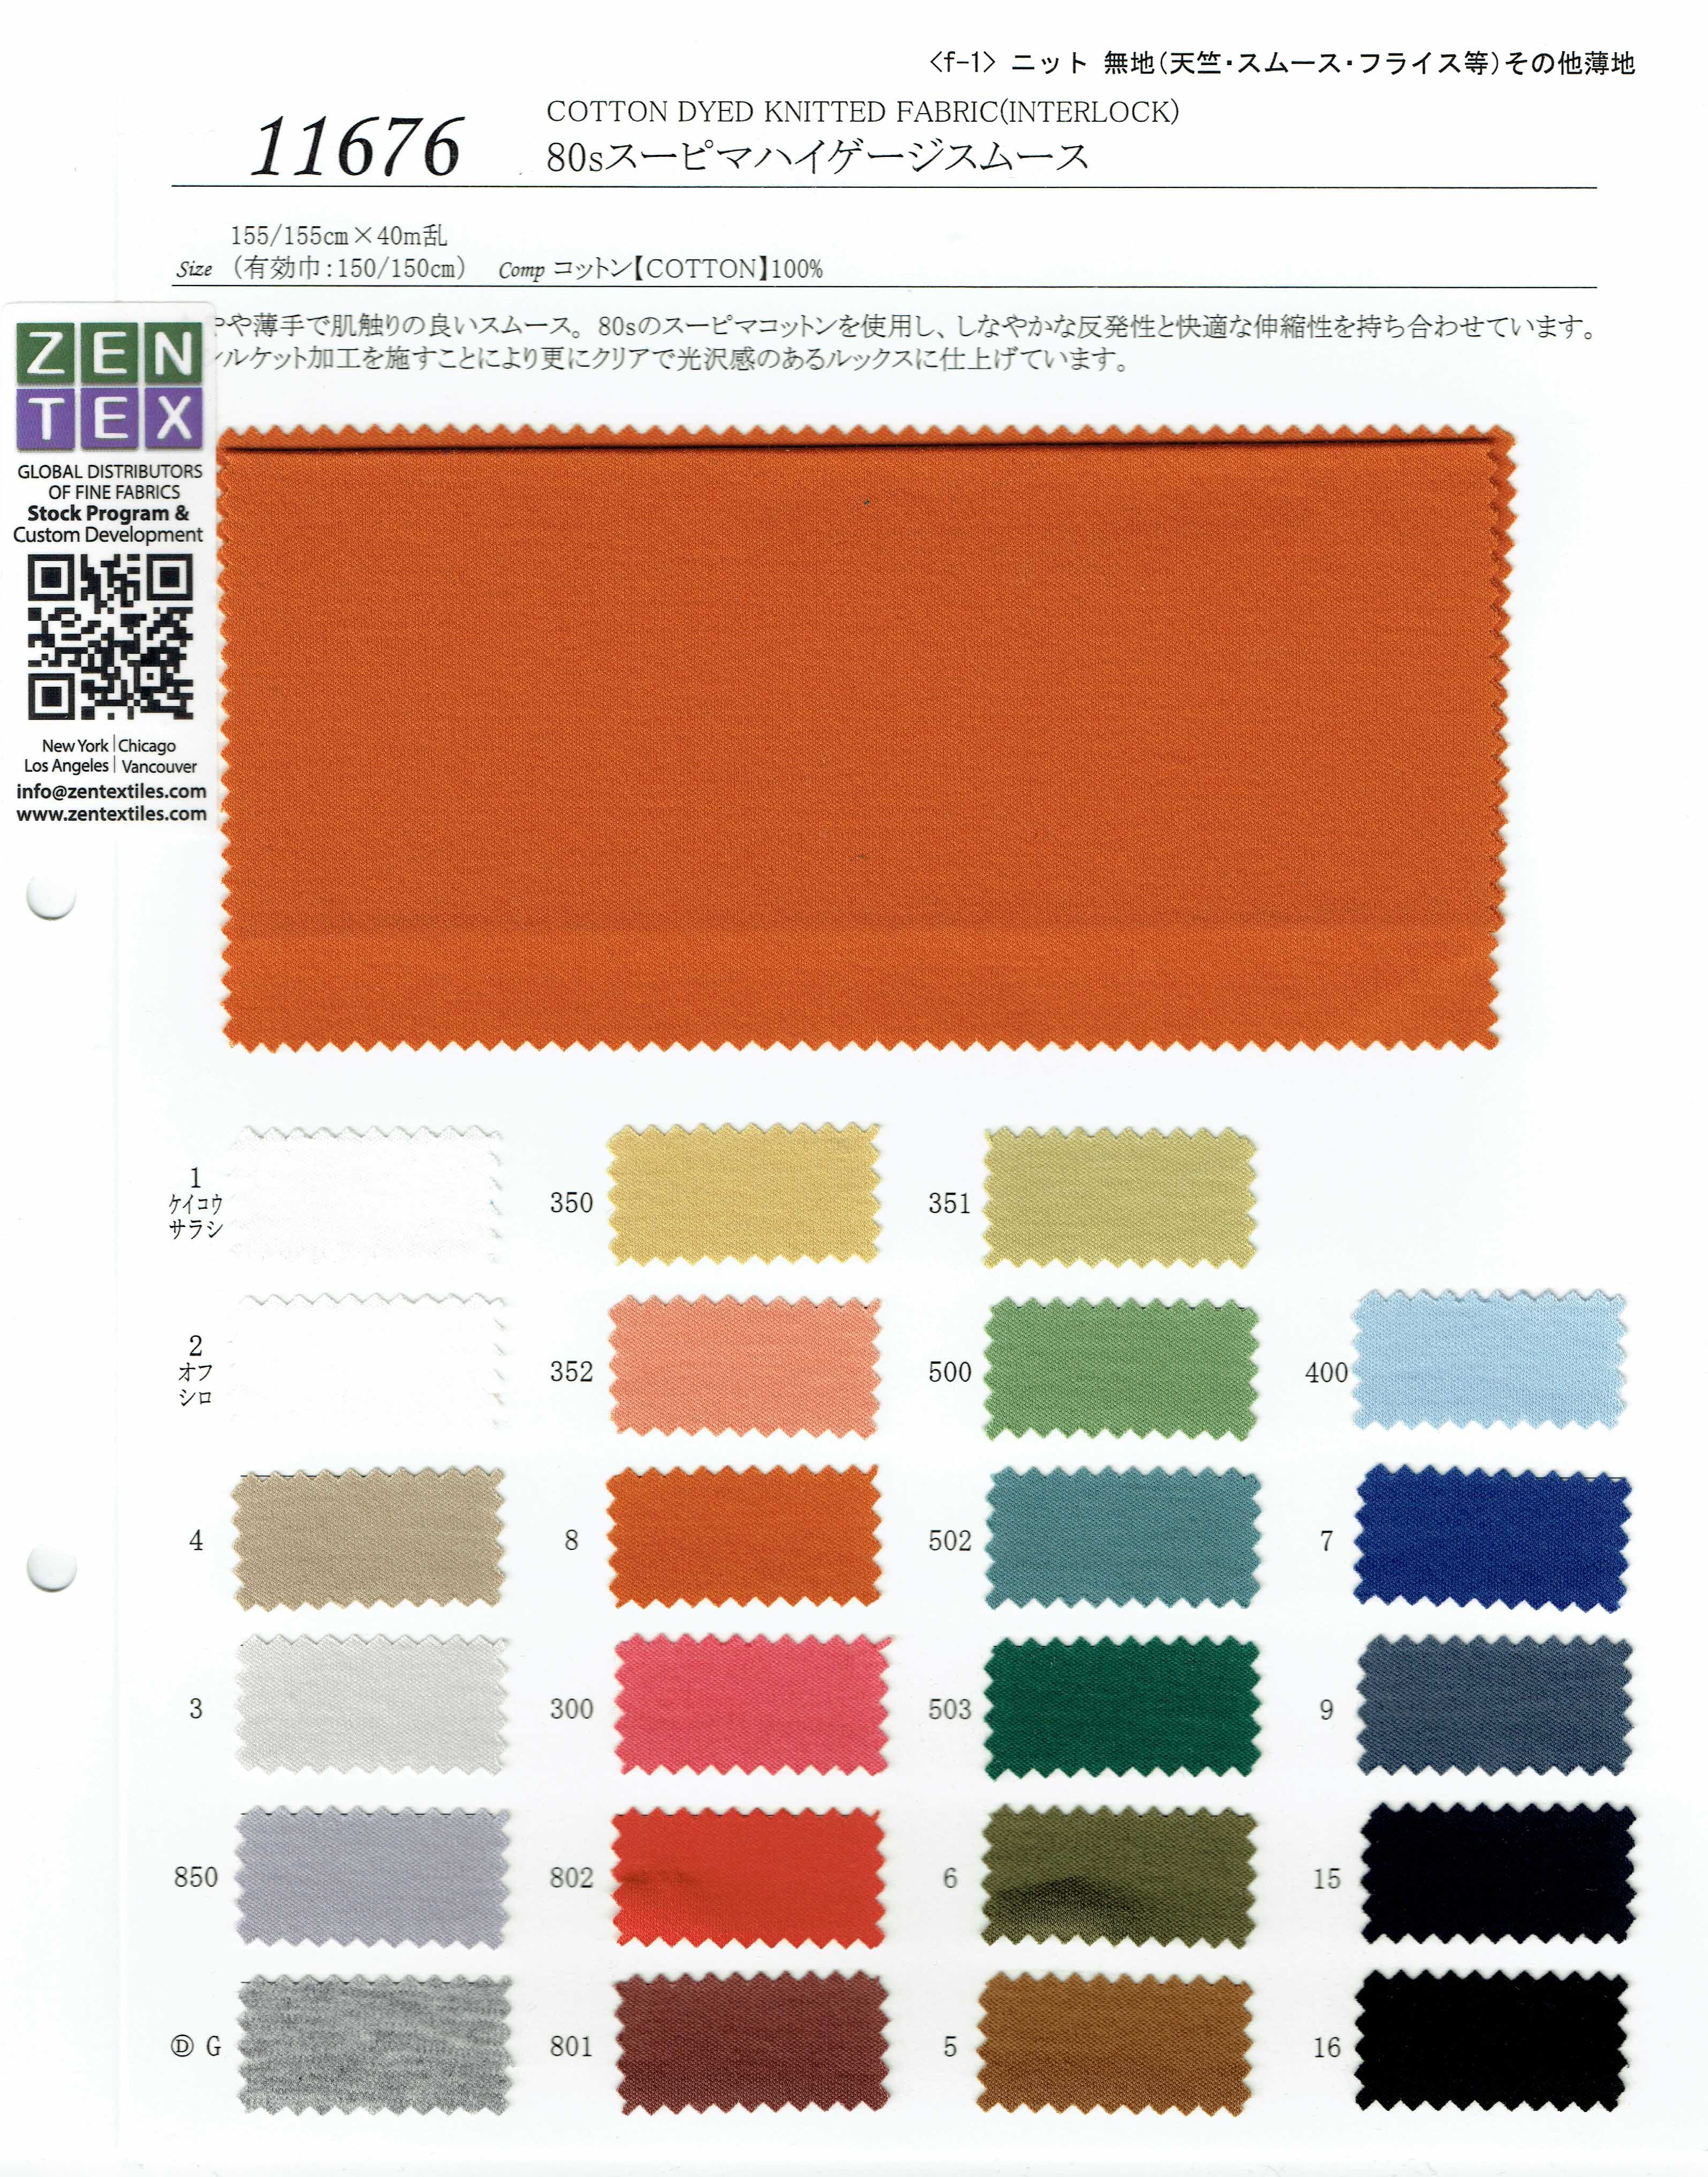 View COTTON100 DYED KNITTED FABRIC[INTERLOCK] DYED KNITTED FABRIC[INTERLOCK]